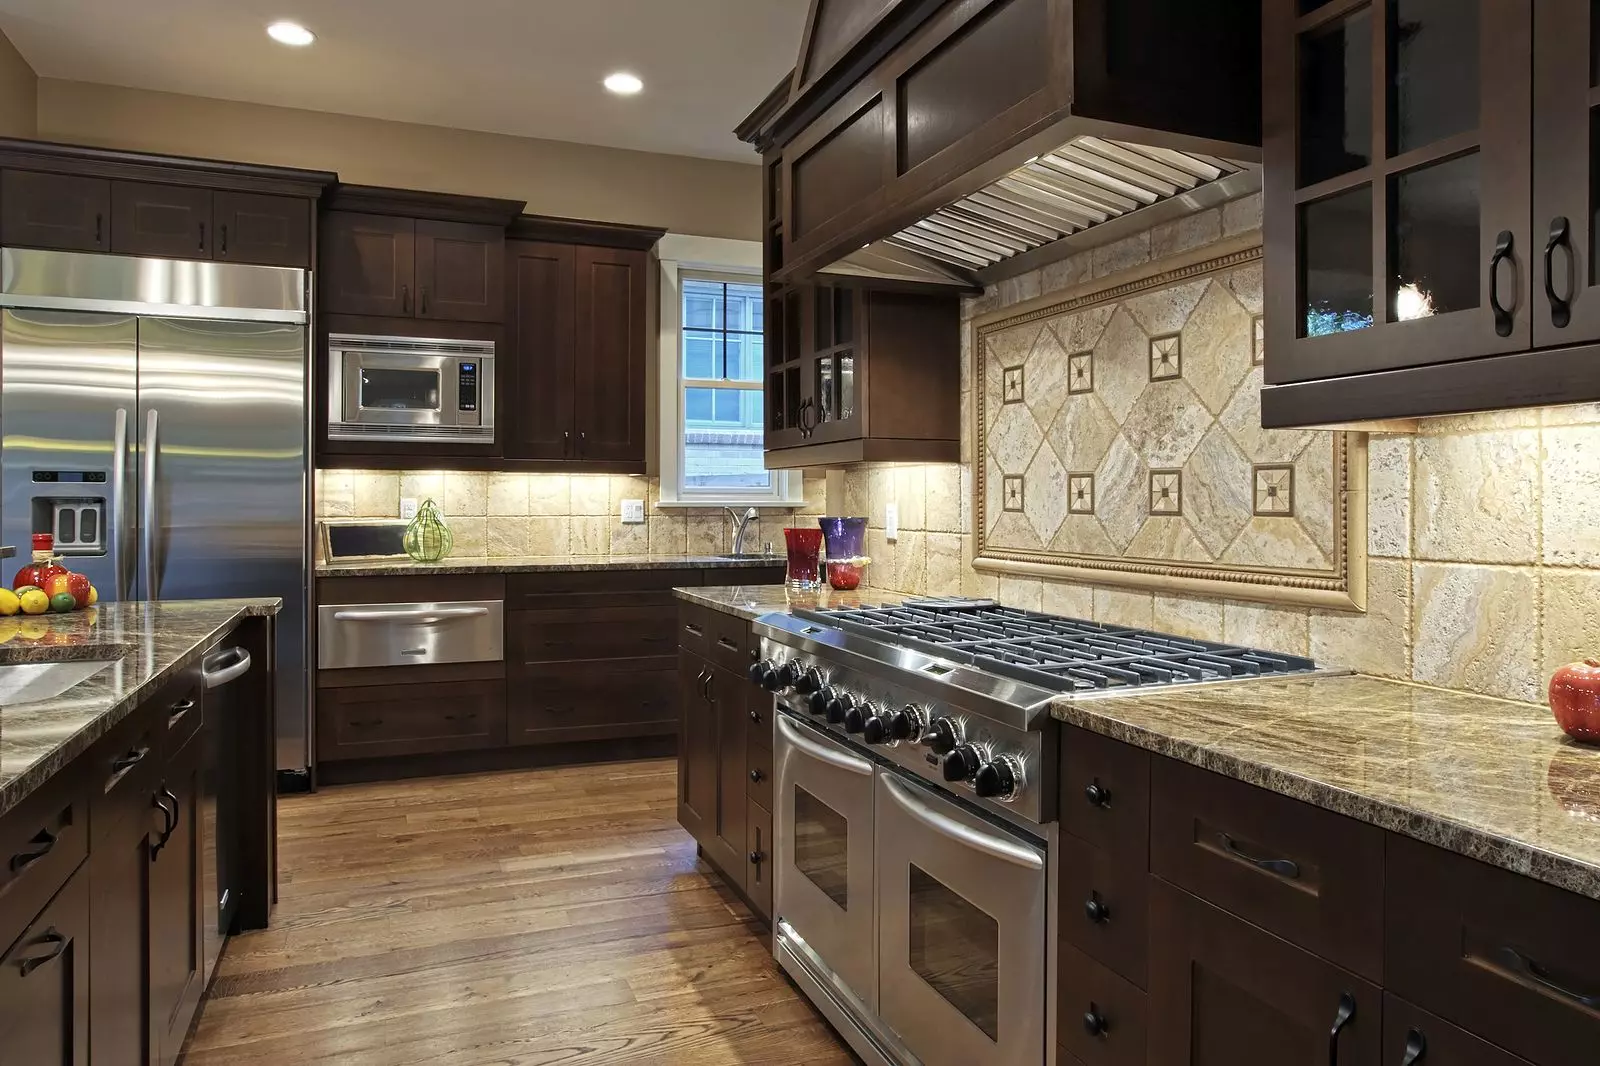 HOW MUCH VALUE CAN A NEW KITCHEN ADD TO YOUR HOME?